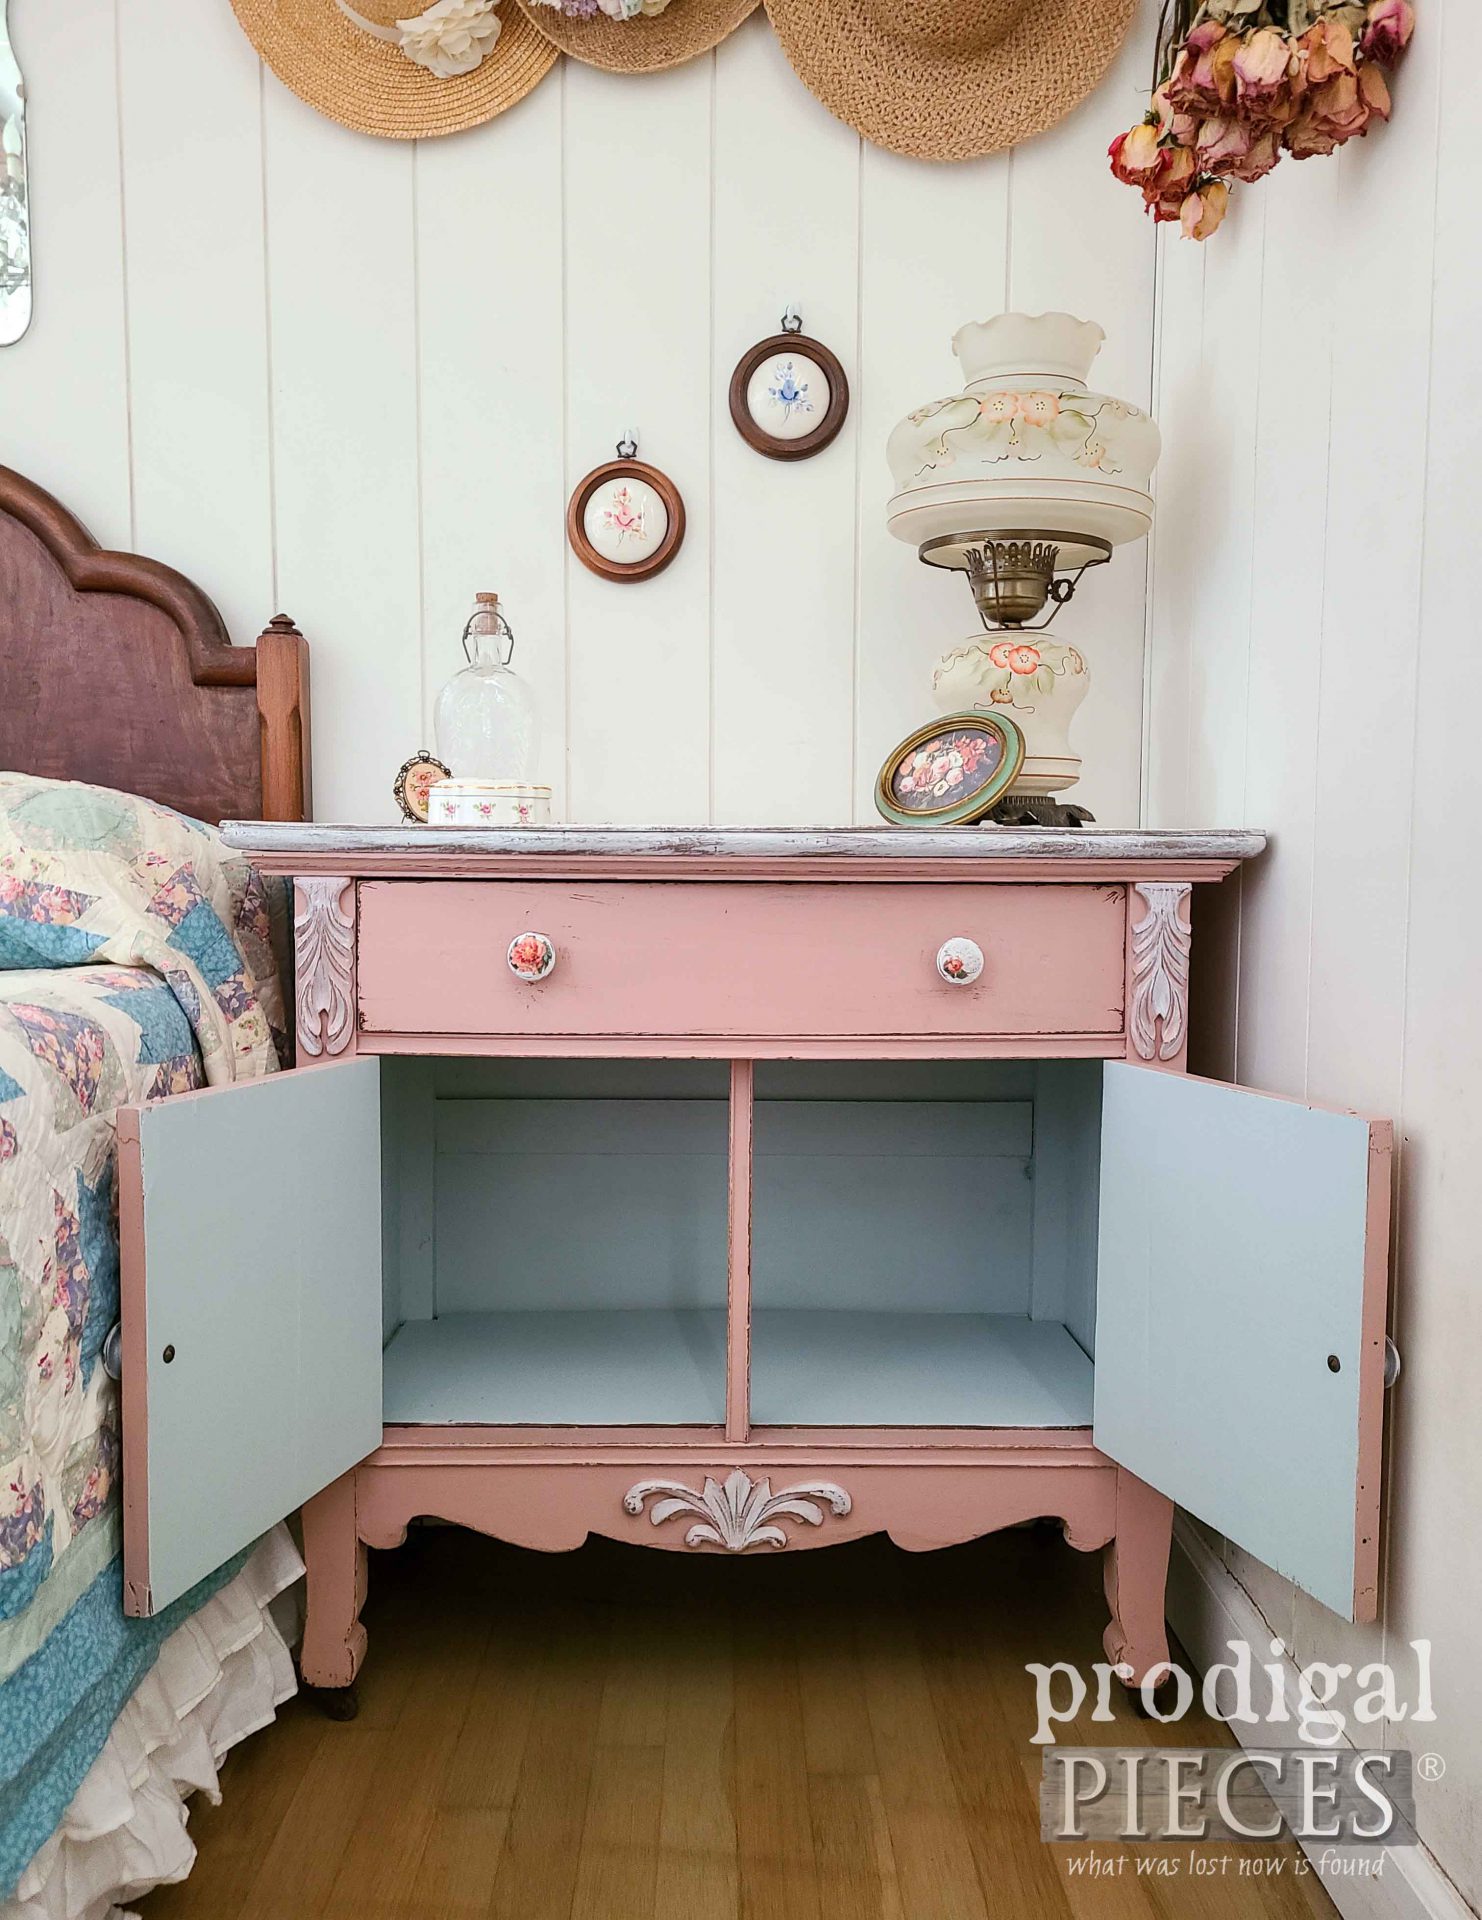 Open Antique Wash Stand with Blue Interior by Larissa of Prodigal Pieces | prodigalpieces.com #prodigalpieces #antique #furniture #homedecor